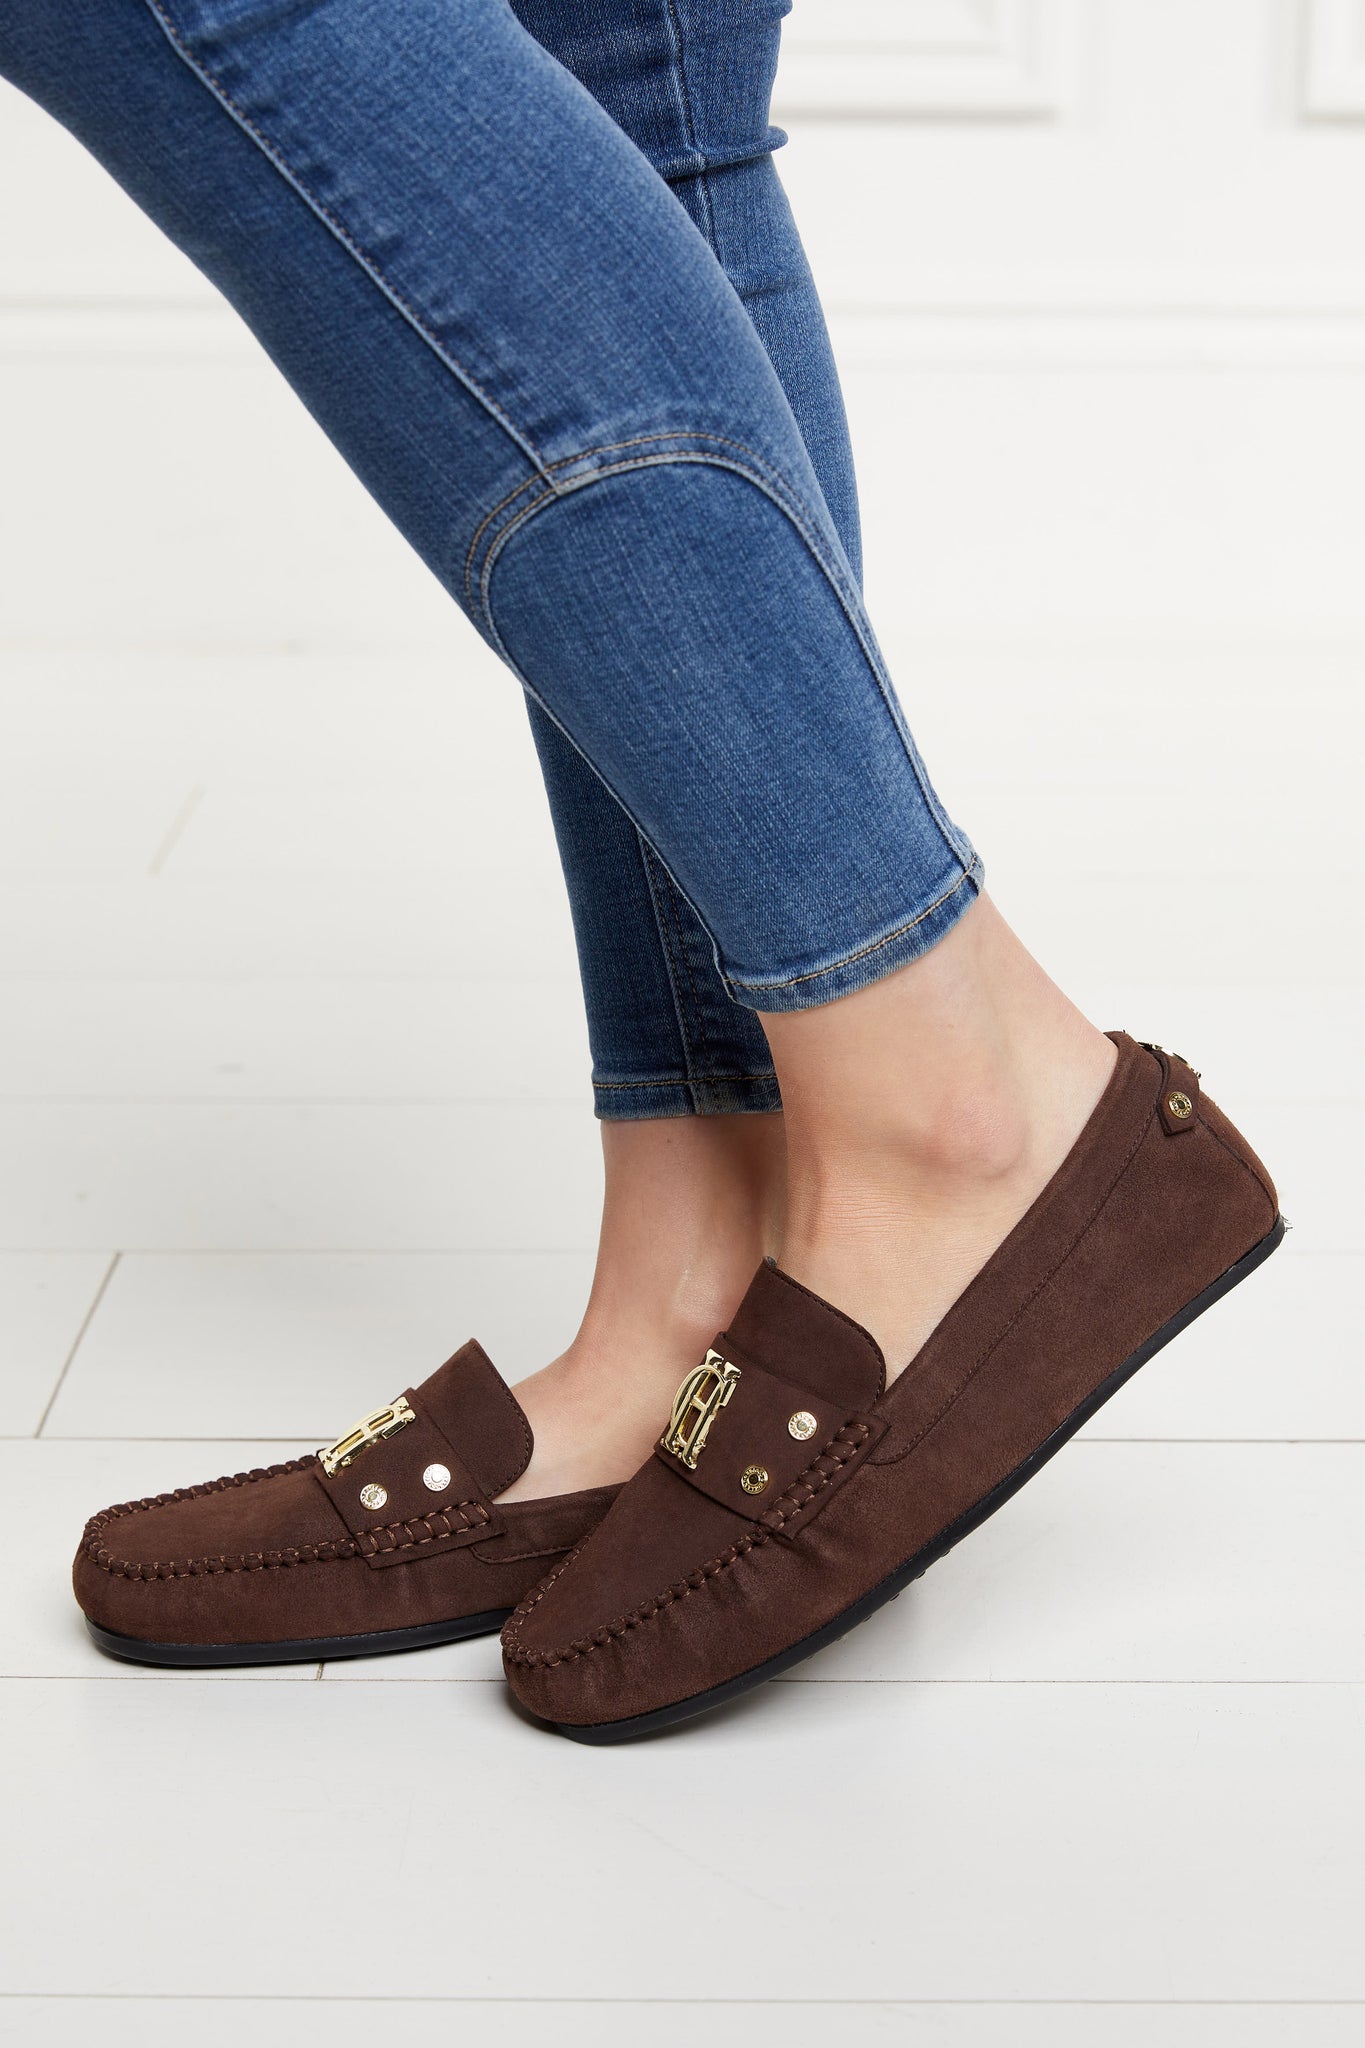 Classic brown suede loafers with a leather sole and top stitching details and gold hardware with skinny denim jeans